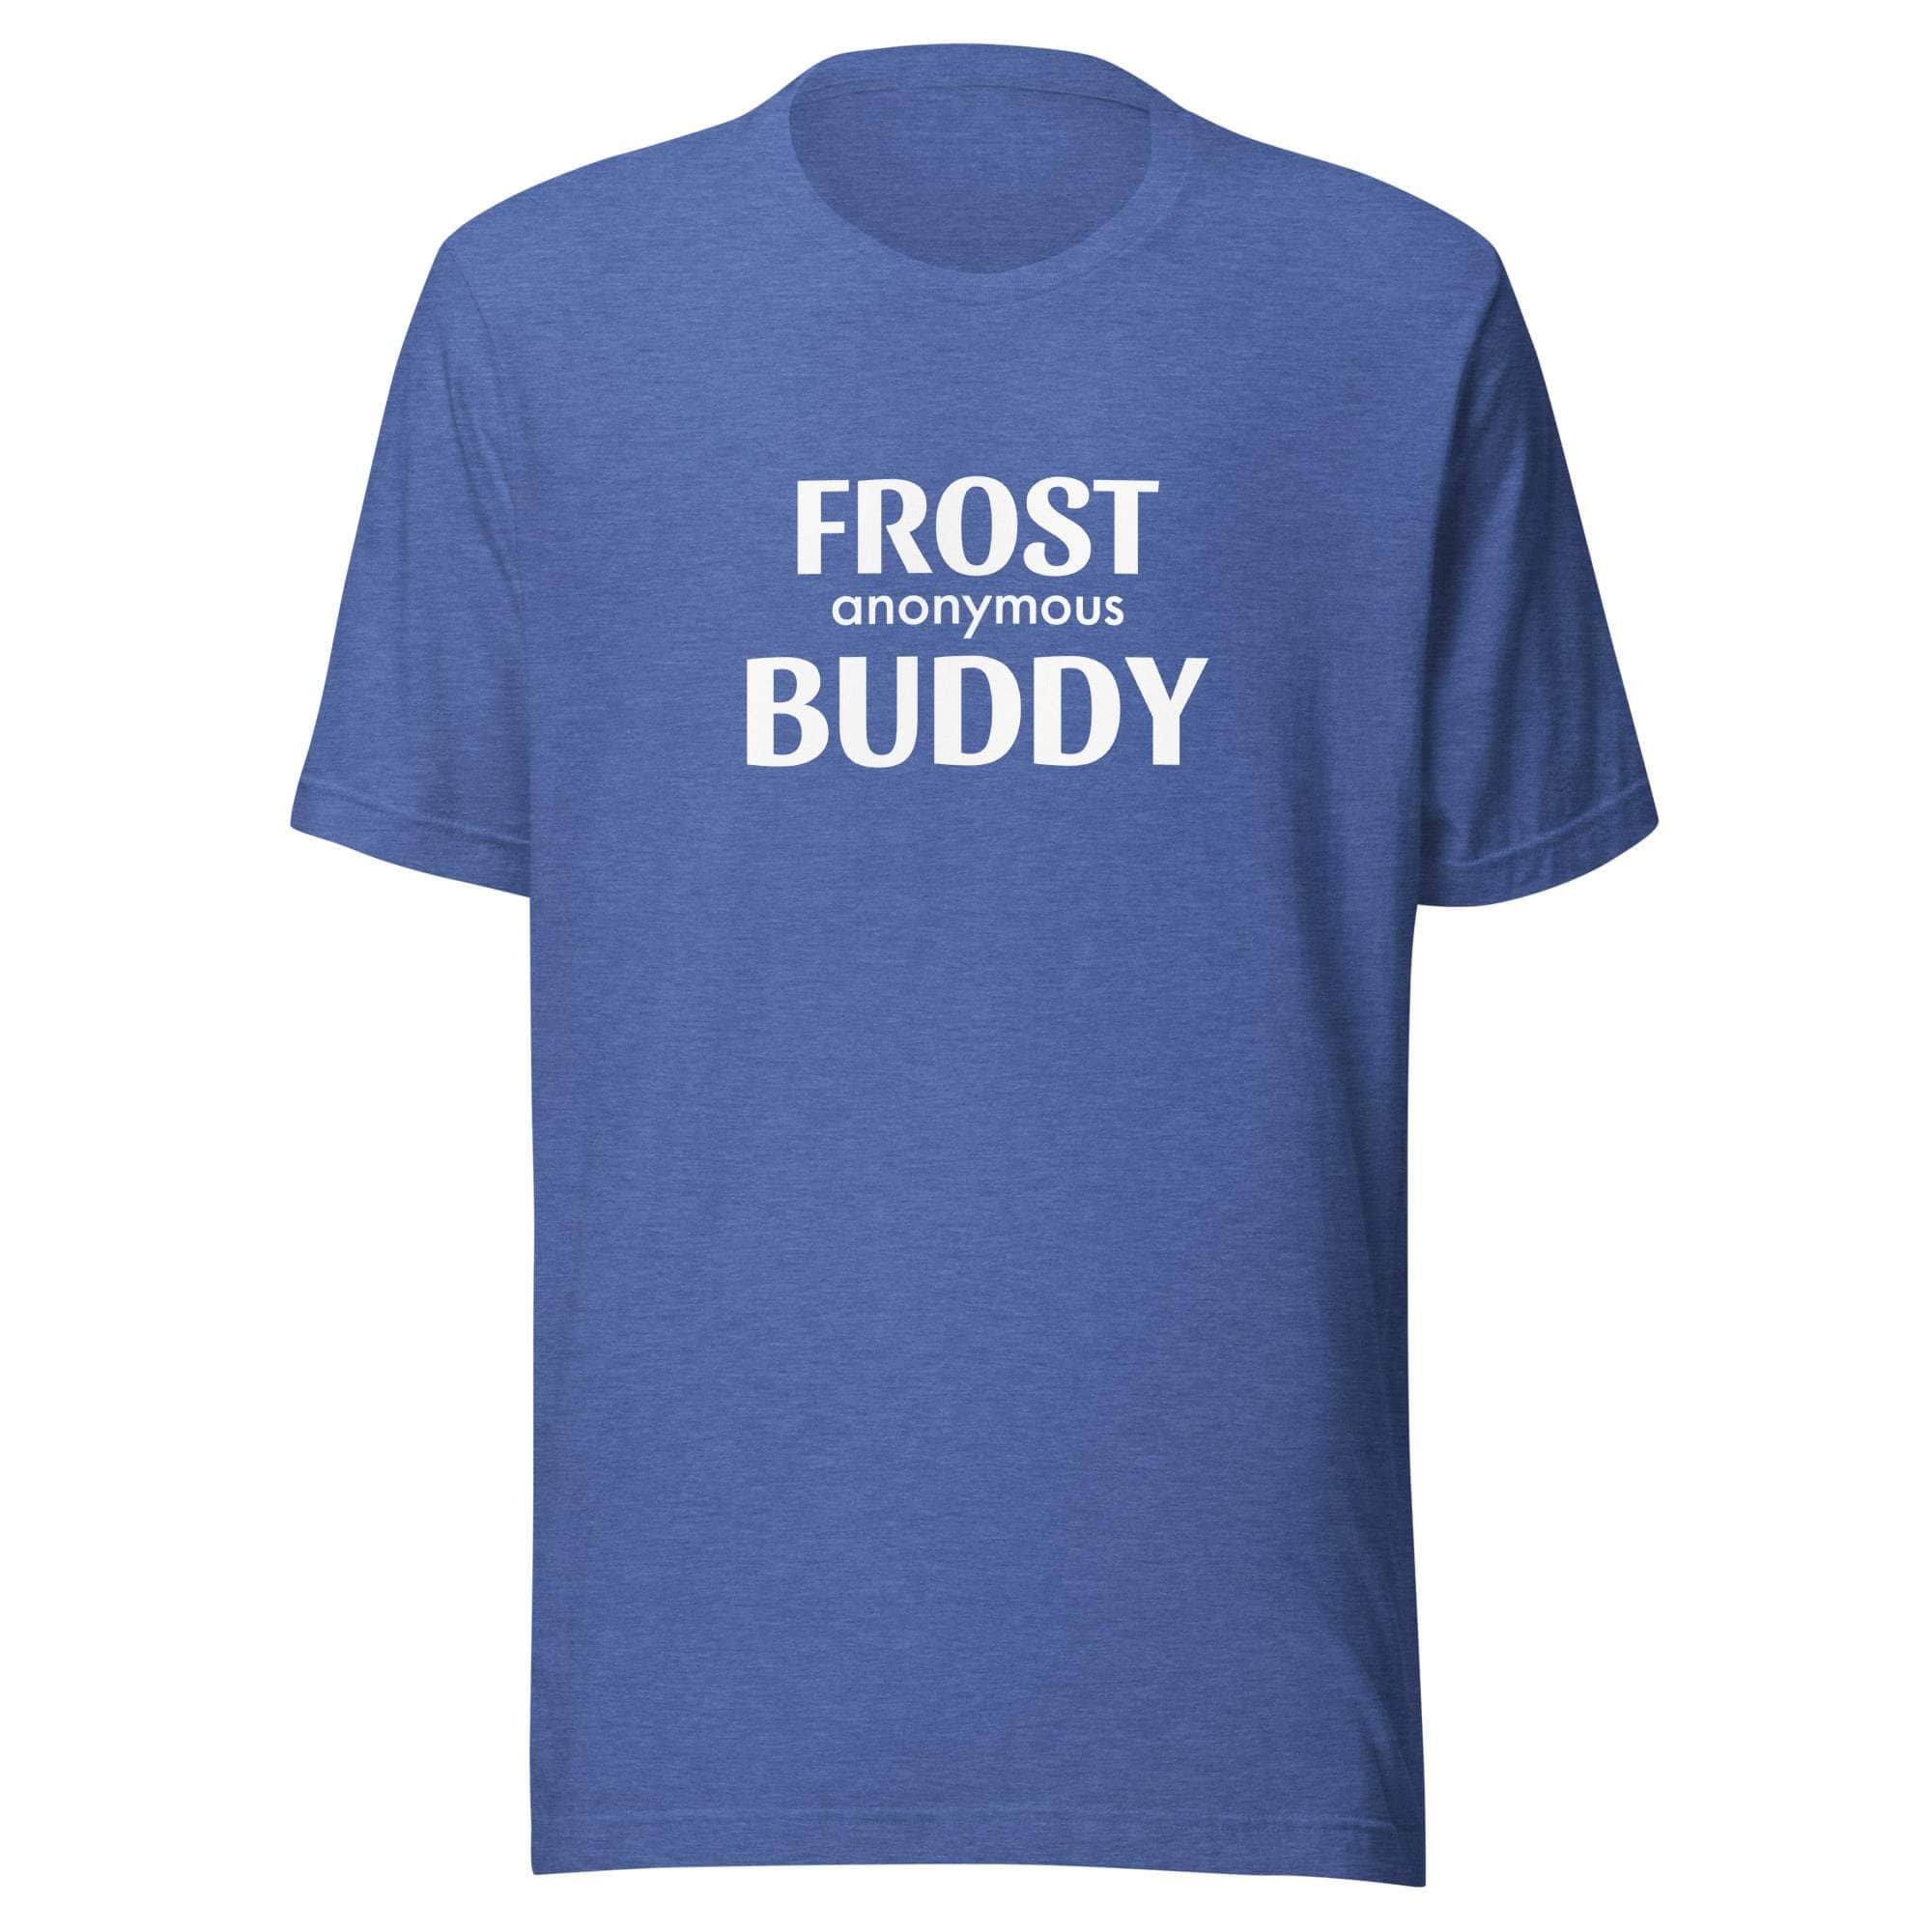 Frost Buddy  Heather True Royal / S Frost Buddy Anonymous Unisex T-shirt